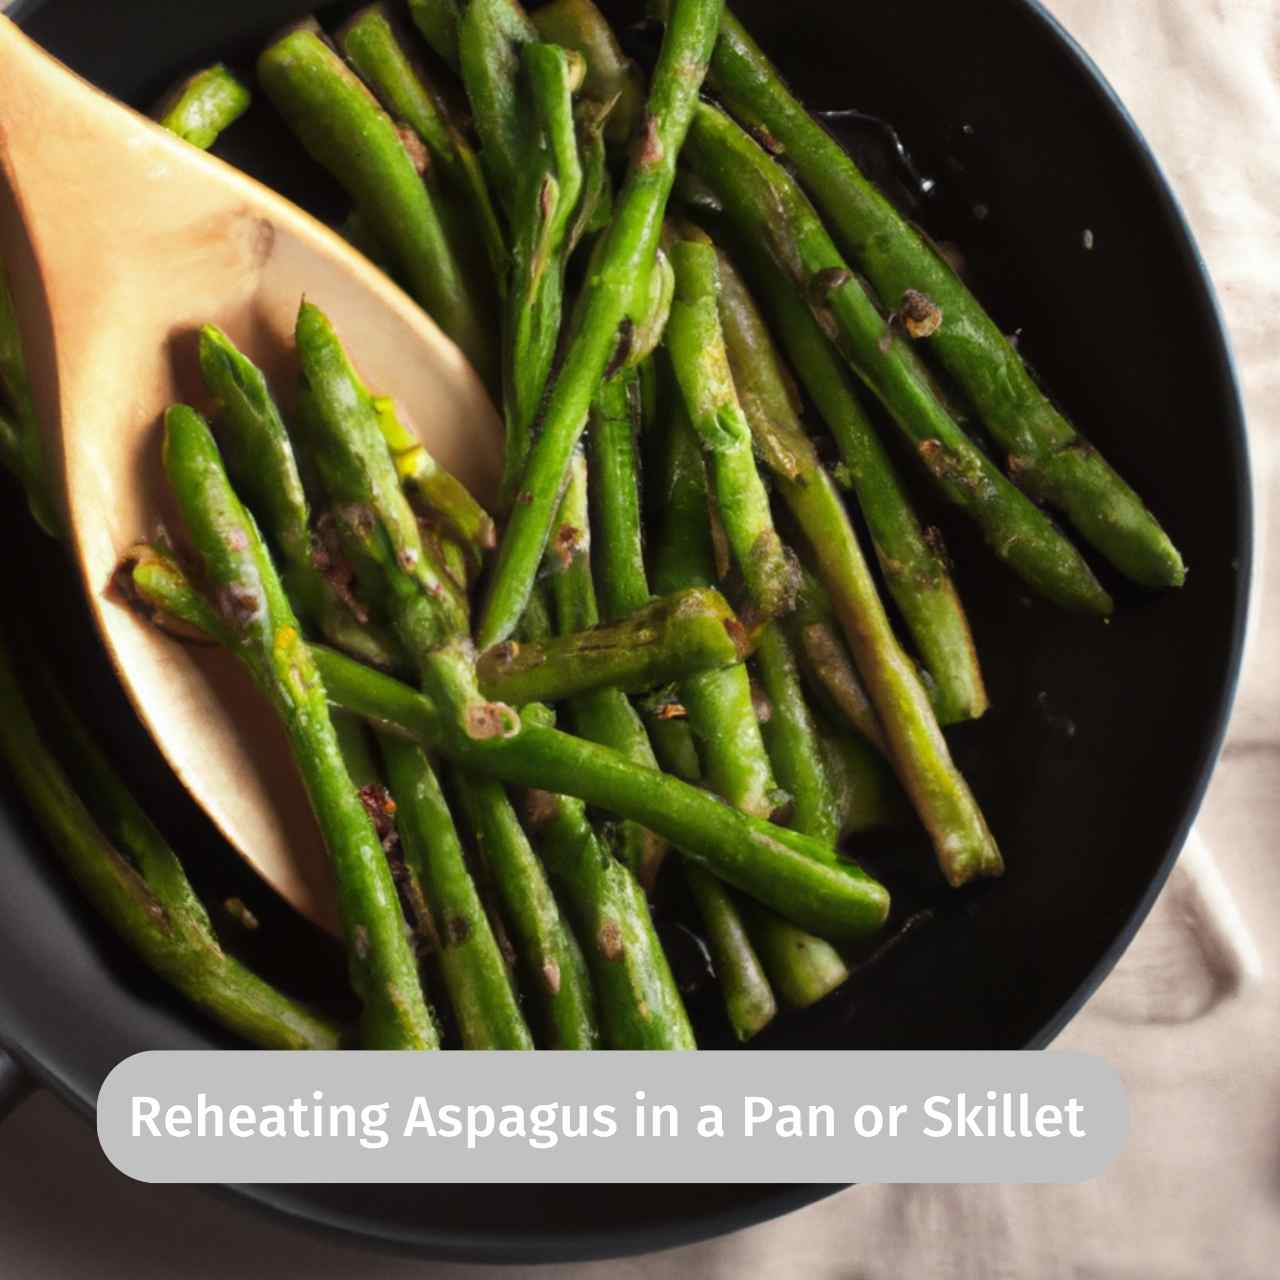 How long does it take to reheat asparagus? - 2.5 up to 5 minutes.